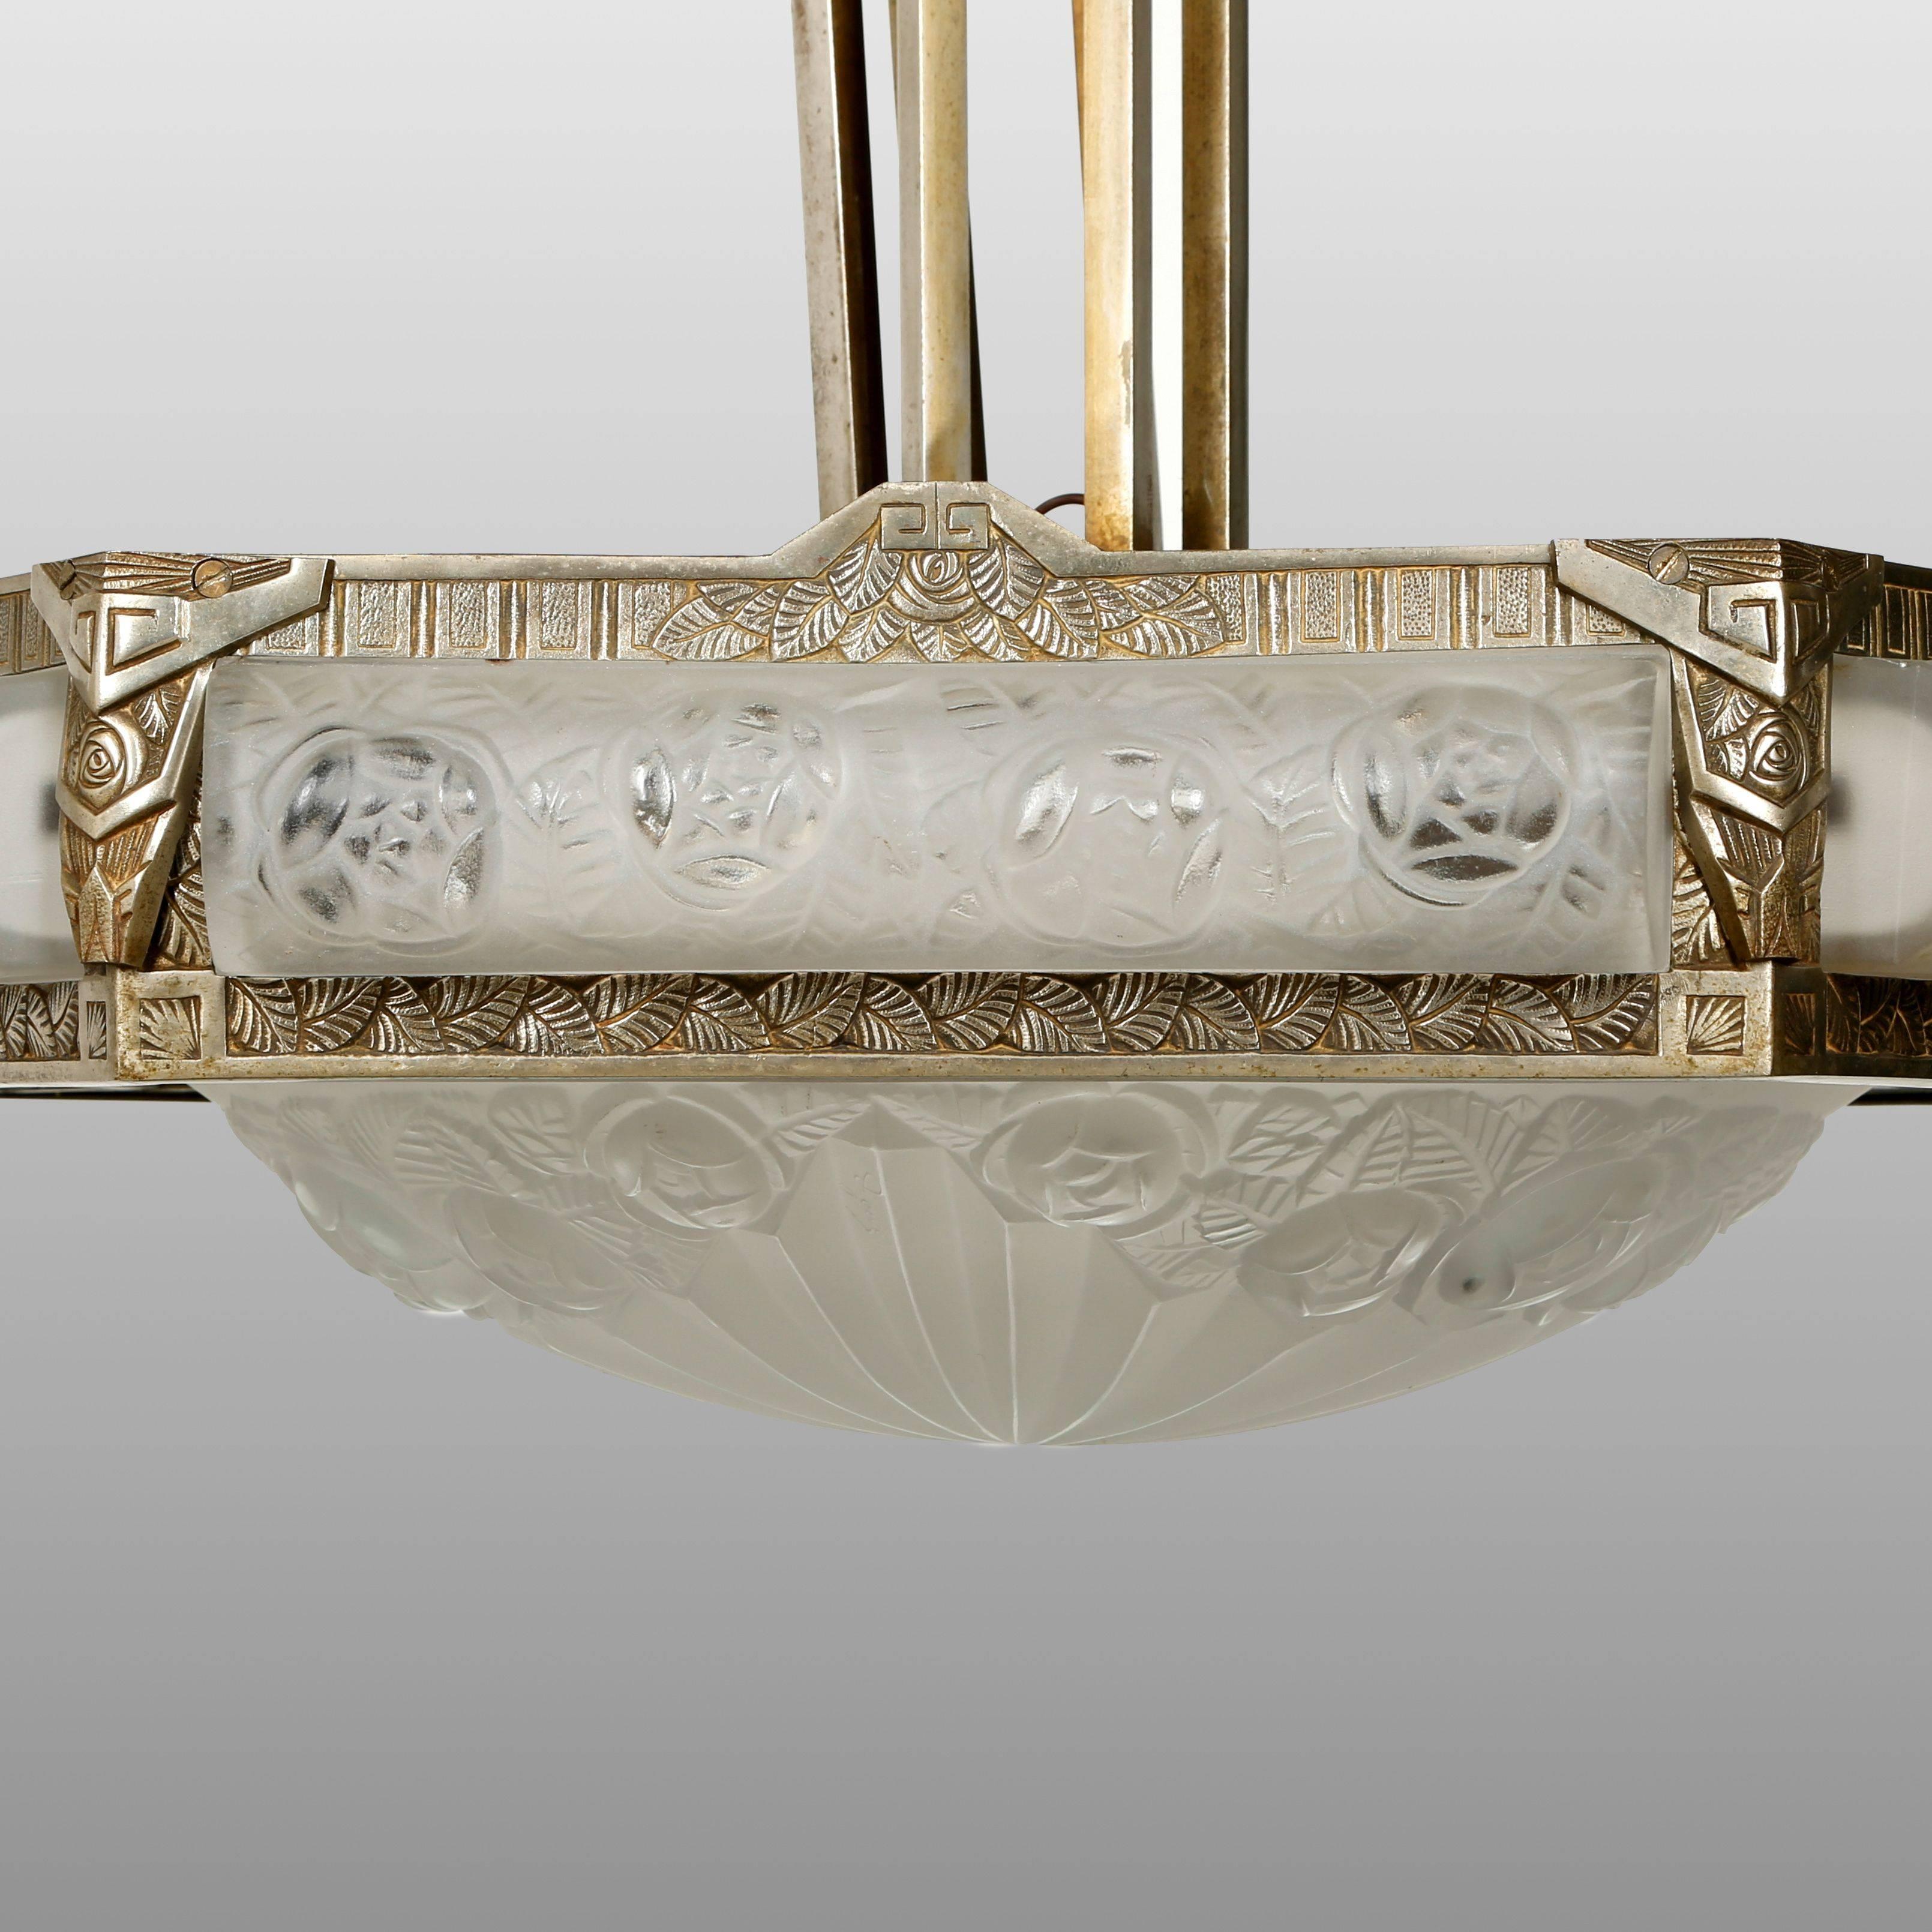 A spectacular and rare French Art Deco chandelier was created by the French artist 